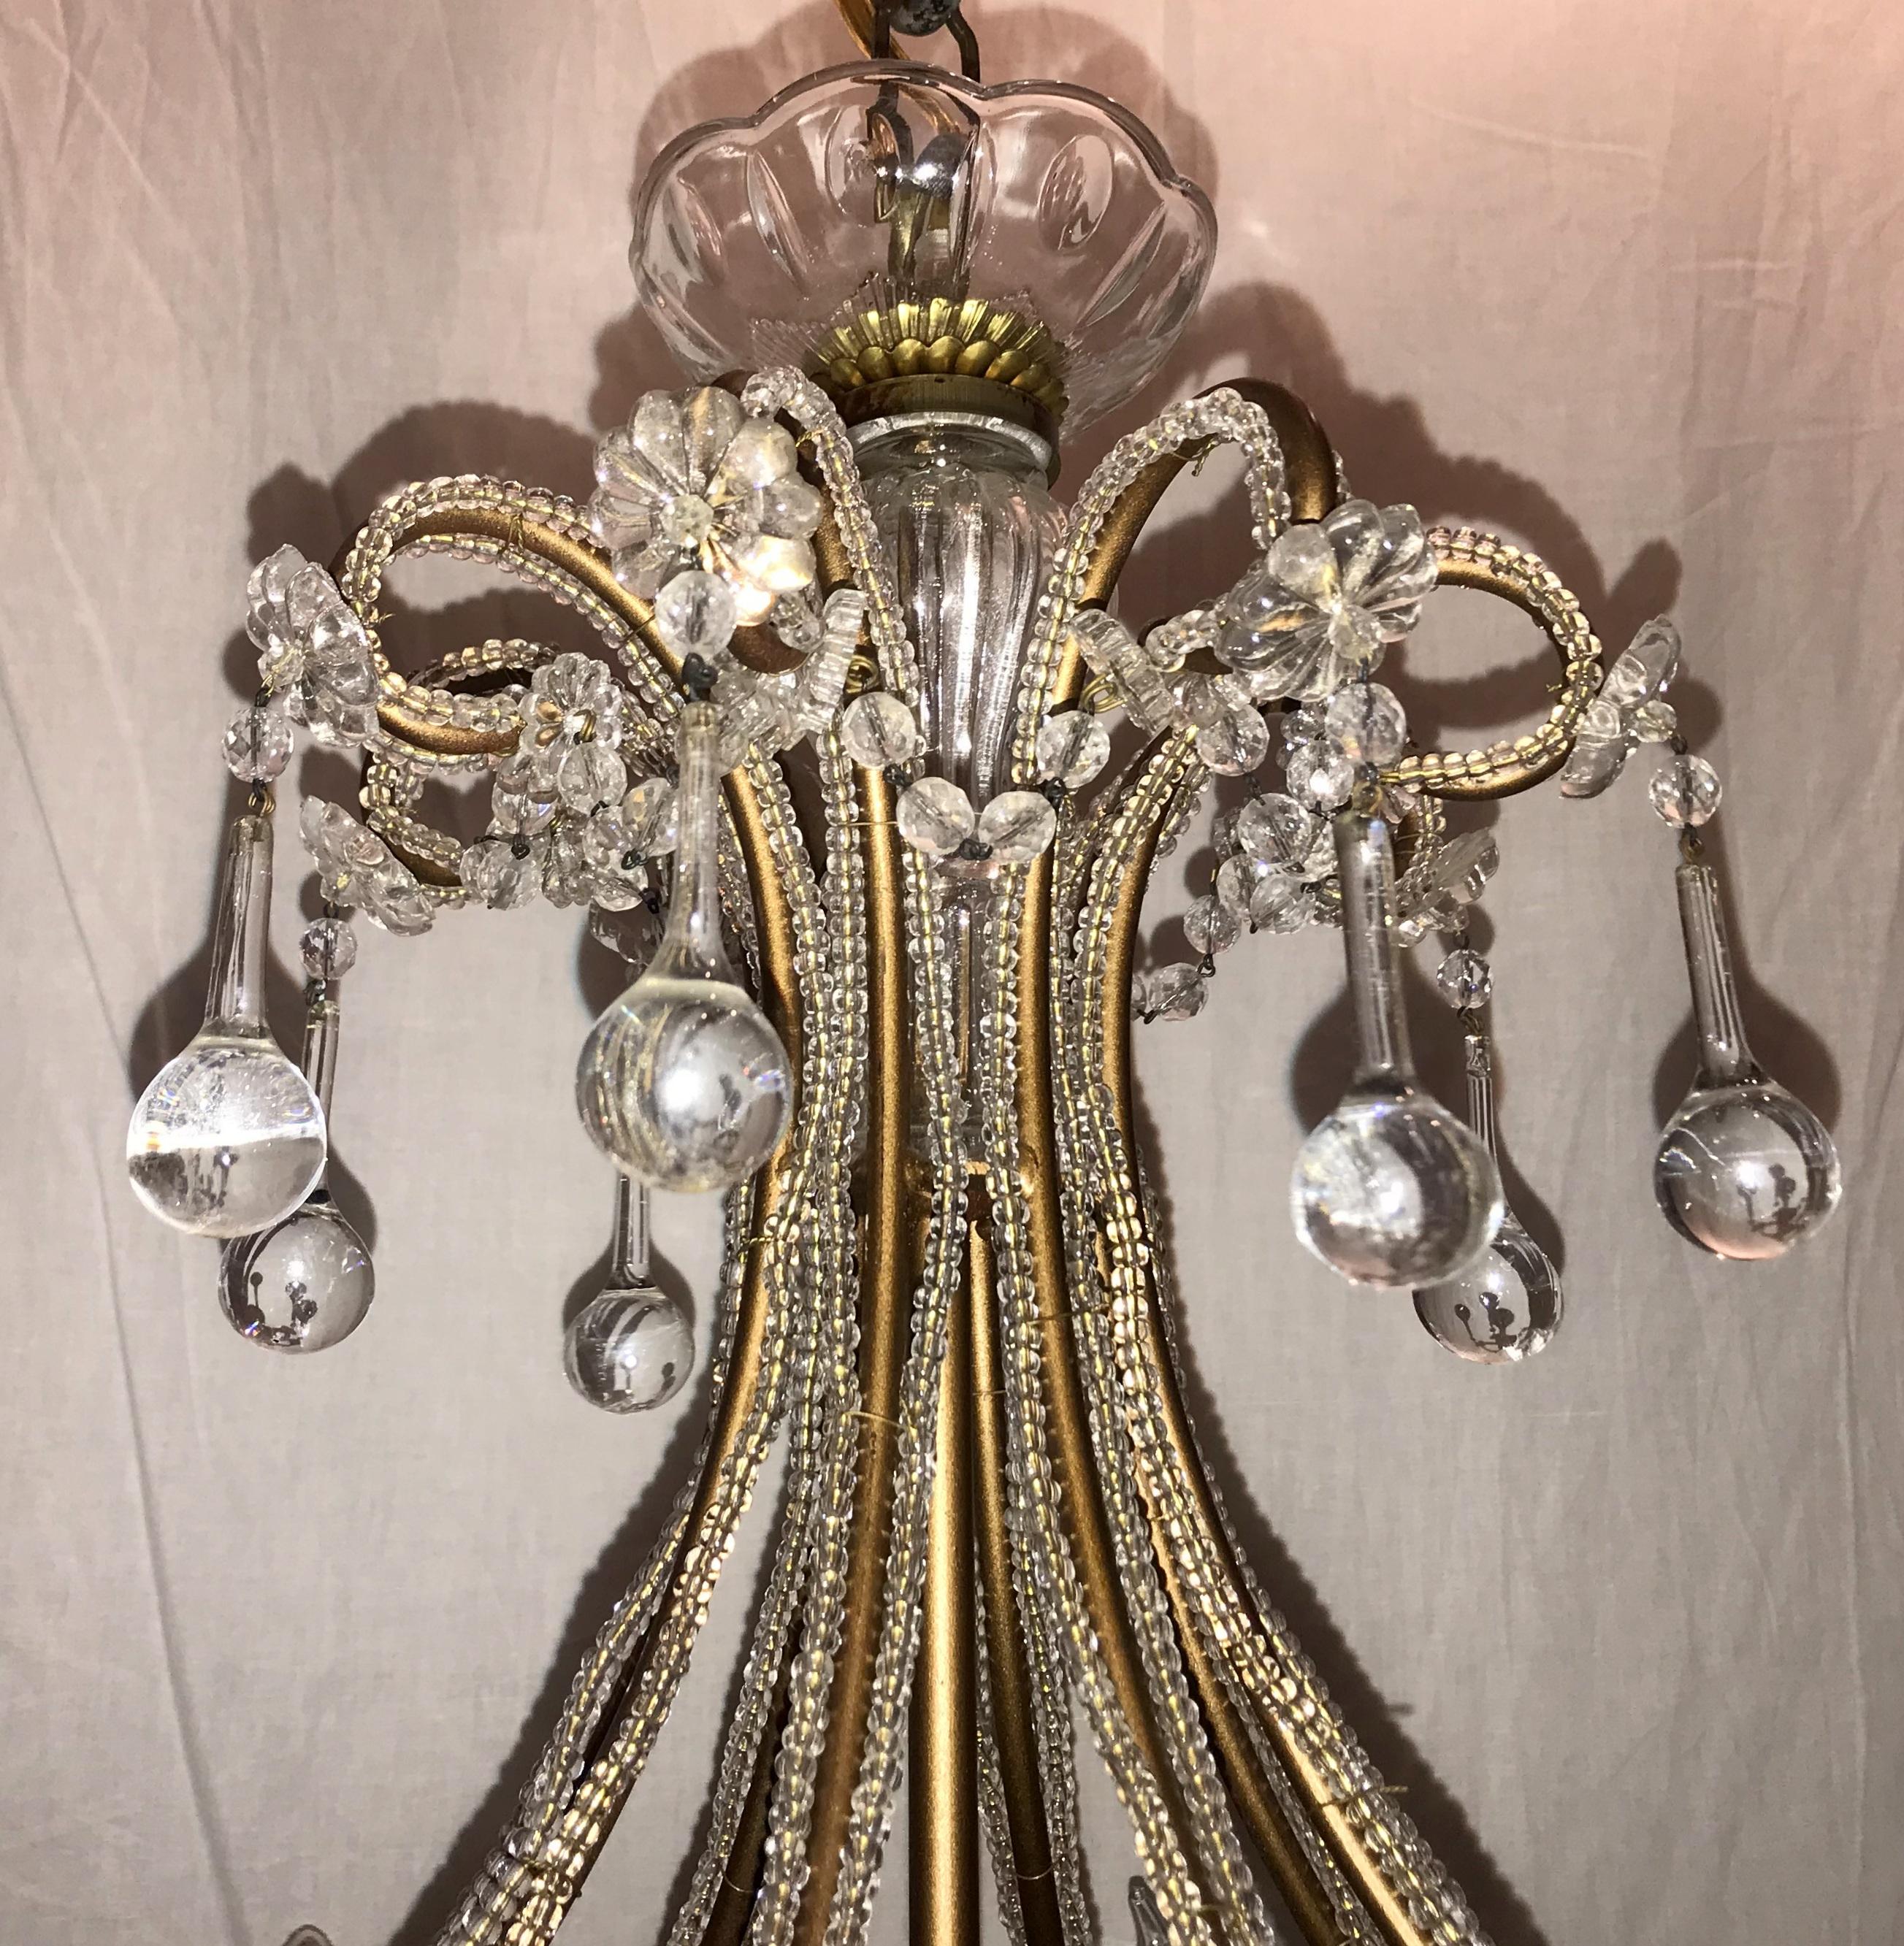 A wonderful Italian Venetian vintage chandelier with beaded crystals throughout the bird cage and beaded swags draped from arm to arm. This beautiful chandelier has eight candelabra lights with tear drops on each of the arms and crystal cups, and is